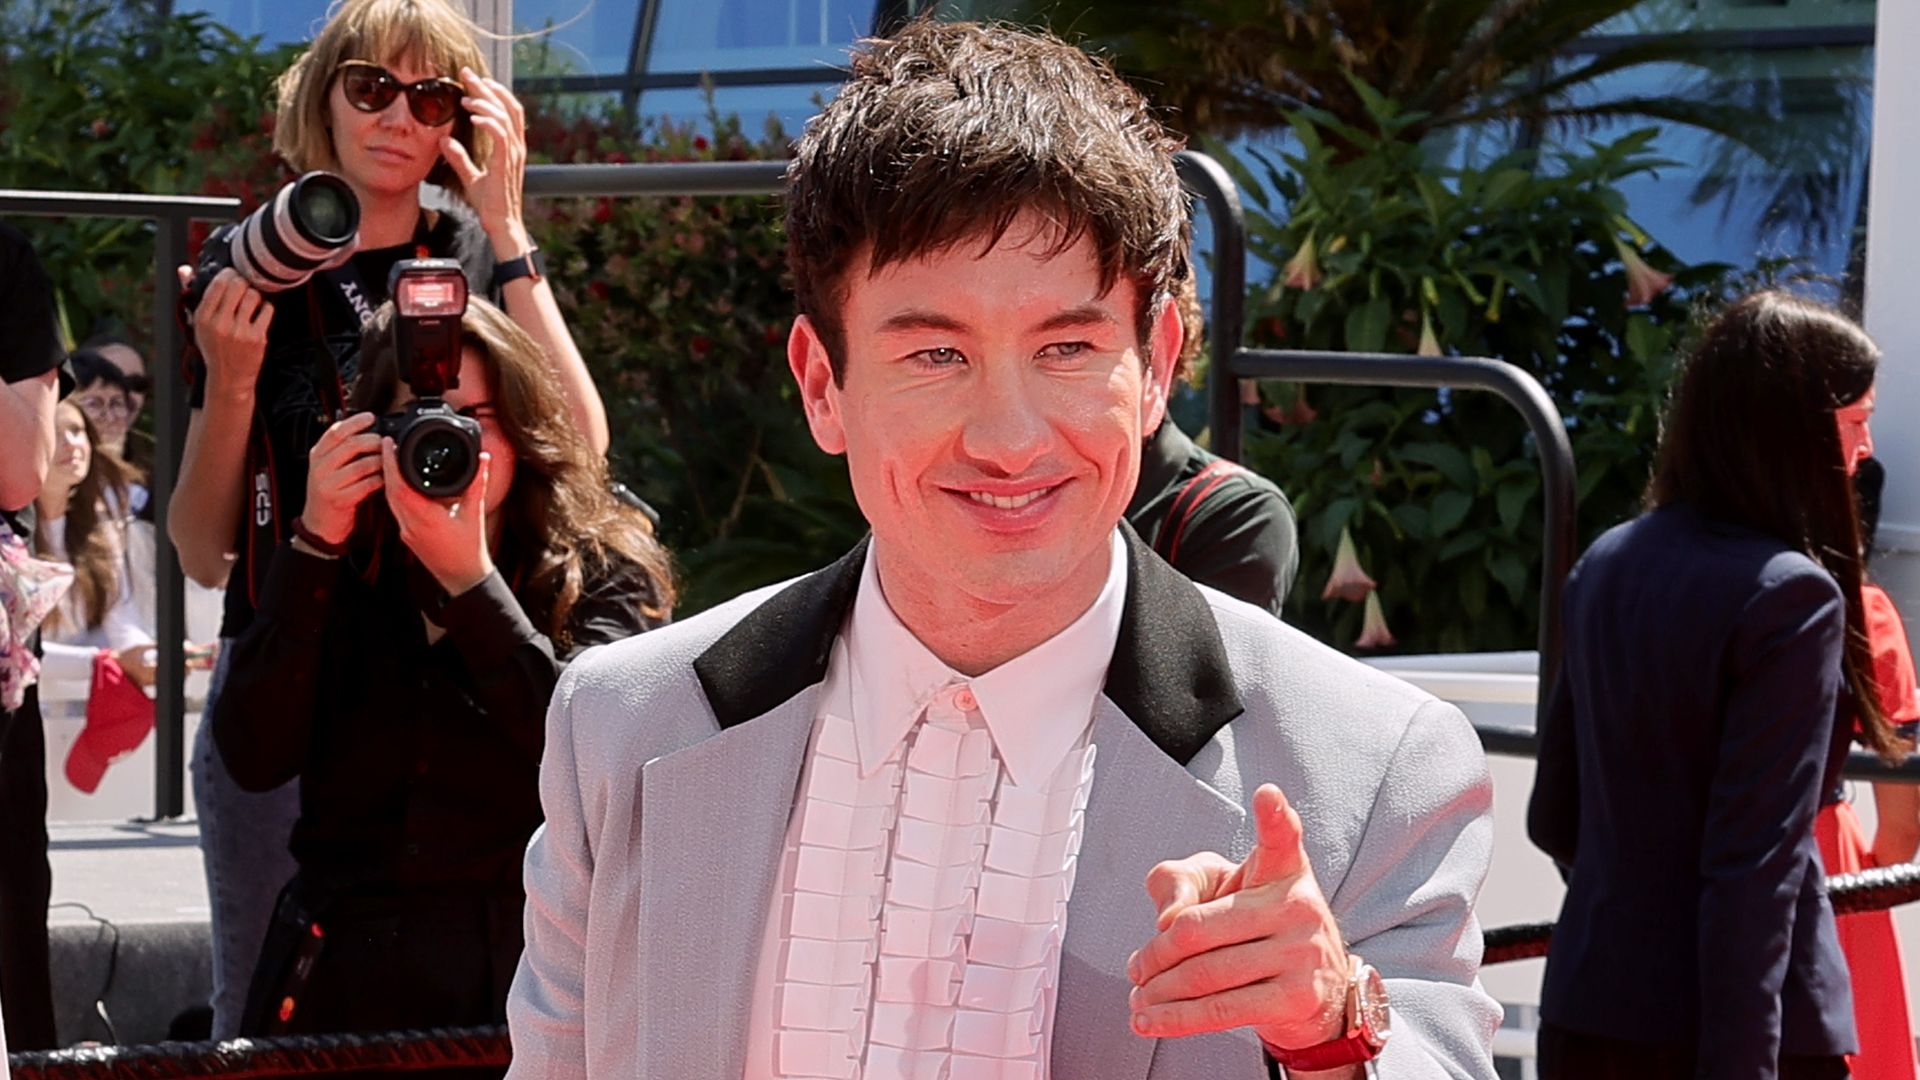 Cannes Film Festival Day 4: Partying with Barry Keoghan and Hunter Schafer